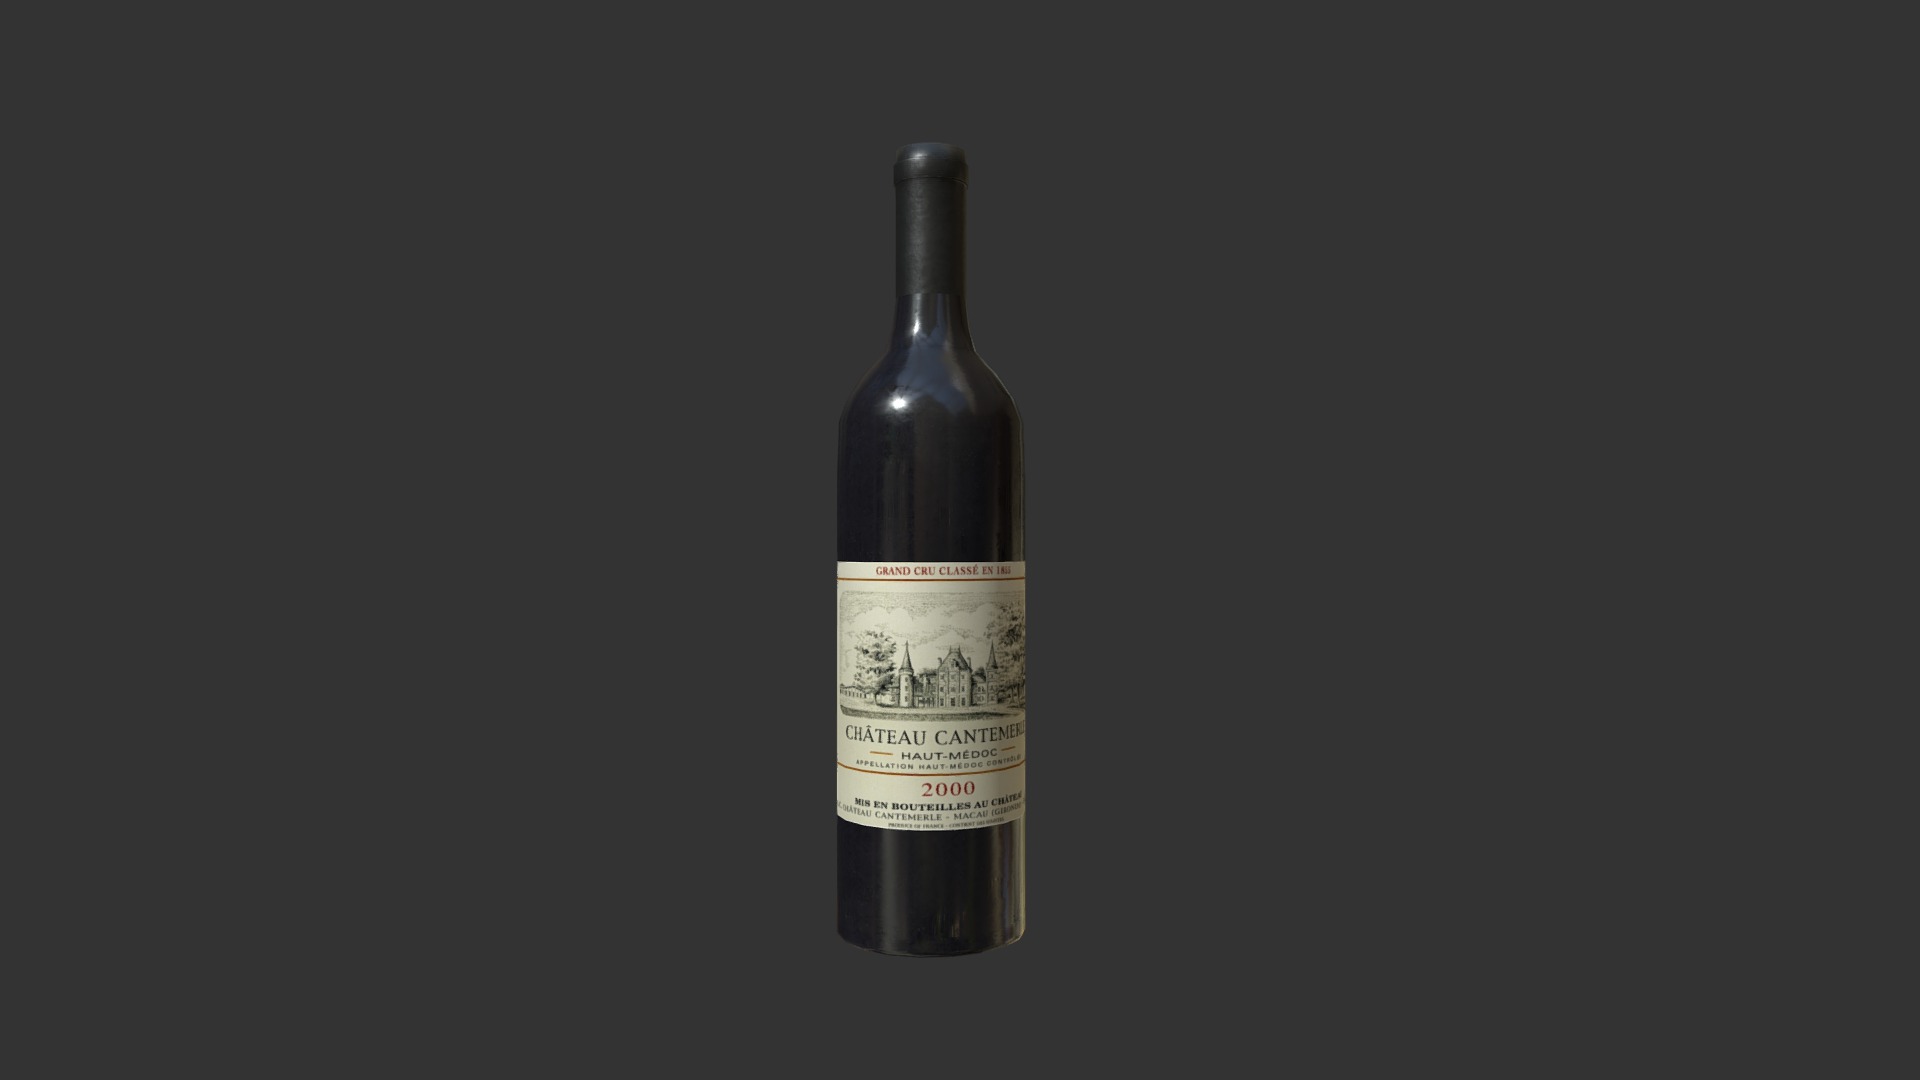 3D model wine bottle Low-poly 3D model - This is a 3D model of the wine bottle Low-poly 3D model. The 3D model is about a bottle of alcohol.